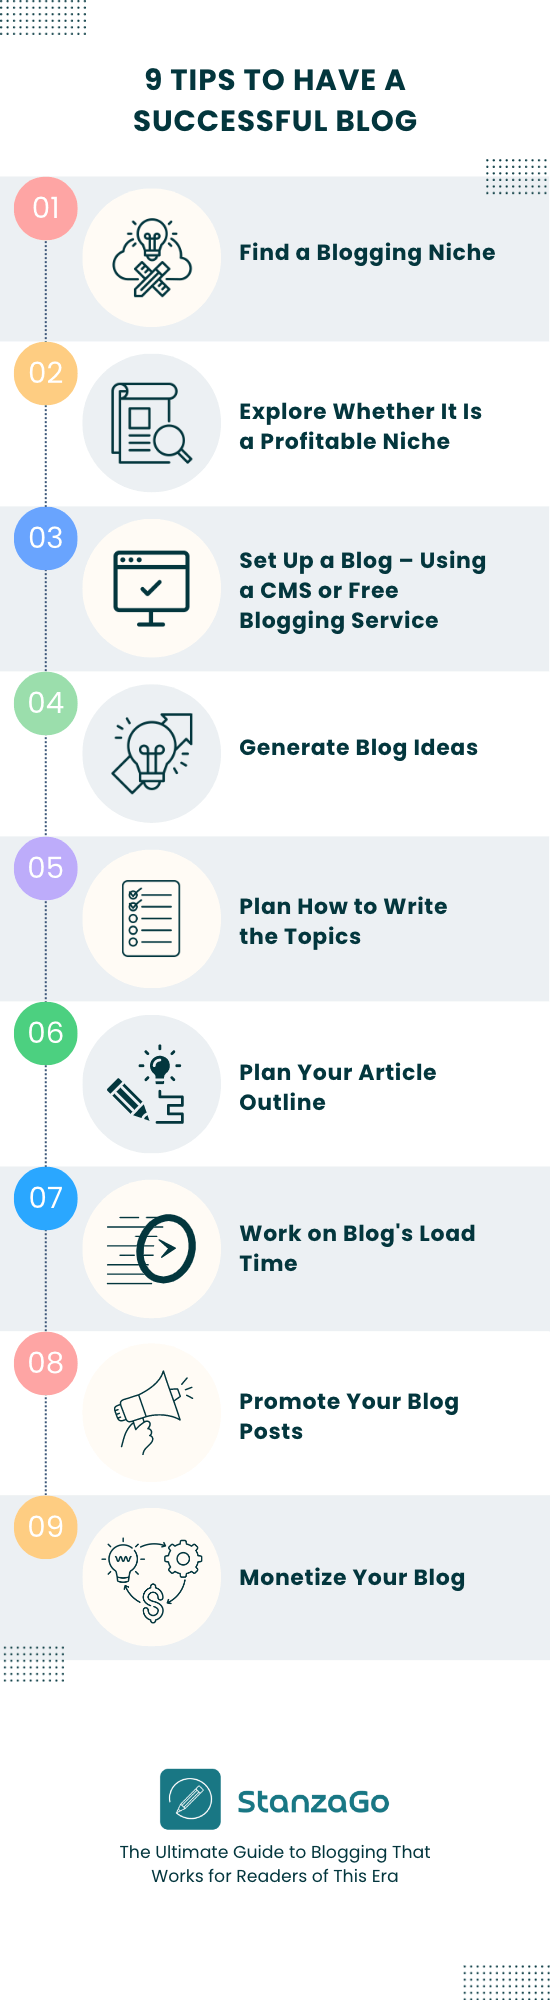 9 Tips to Have a Successful Blog